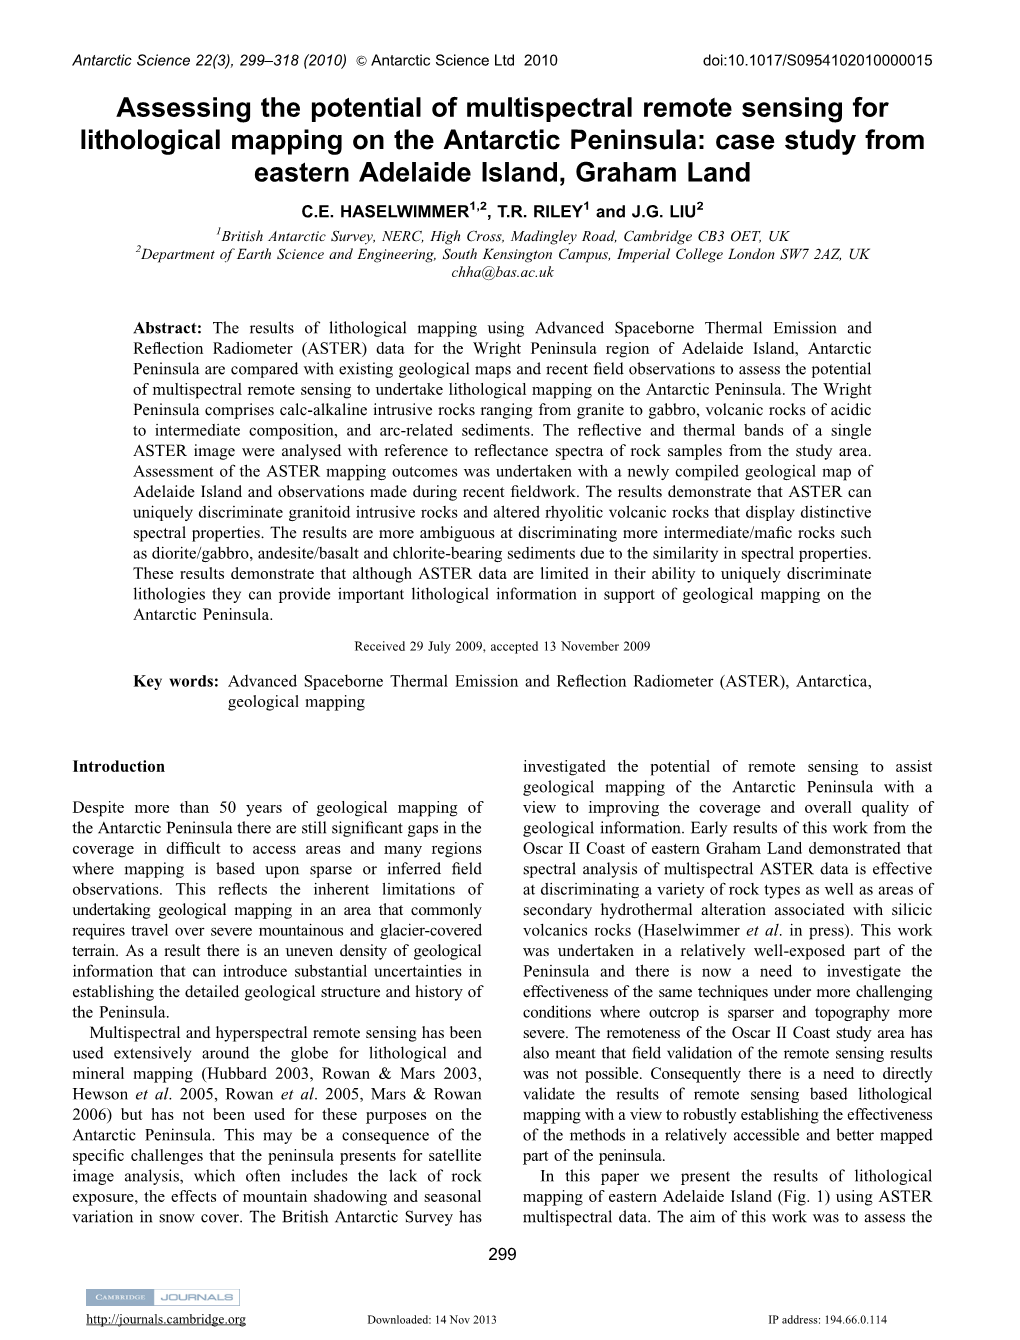 Assessing the Potential of Multispectral Remote Sensing for Lithological Mapping on the Antarctic Peninsula: Case Study from Eastern Adelaide Island, Graham Land C.E